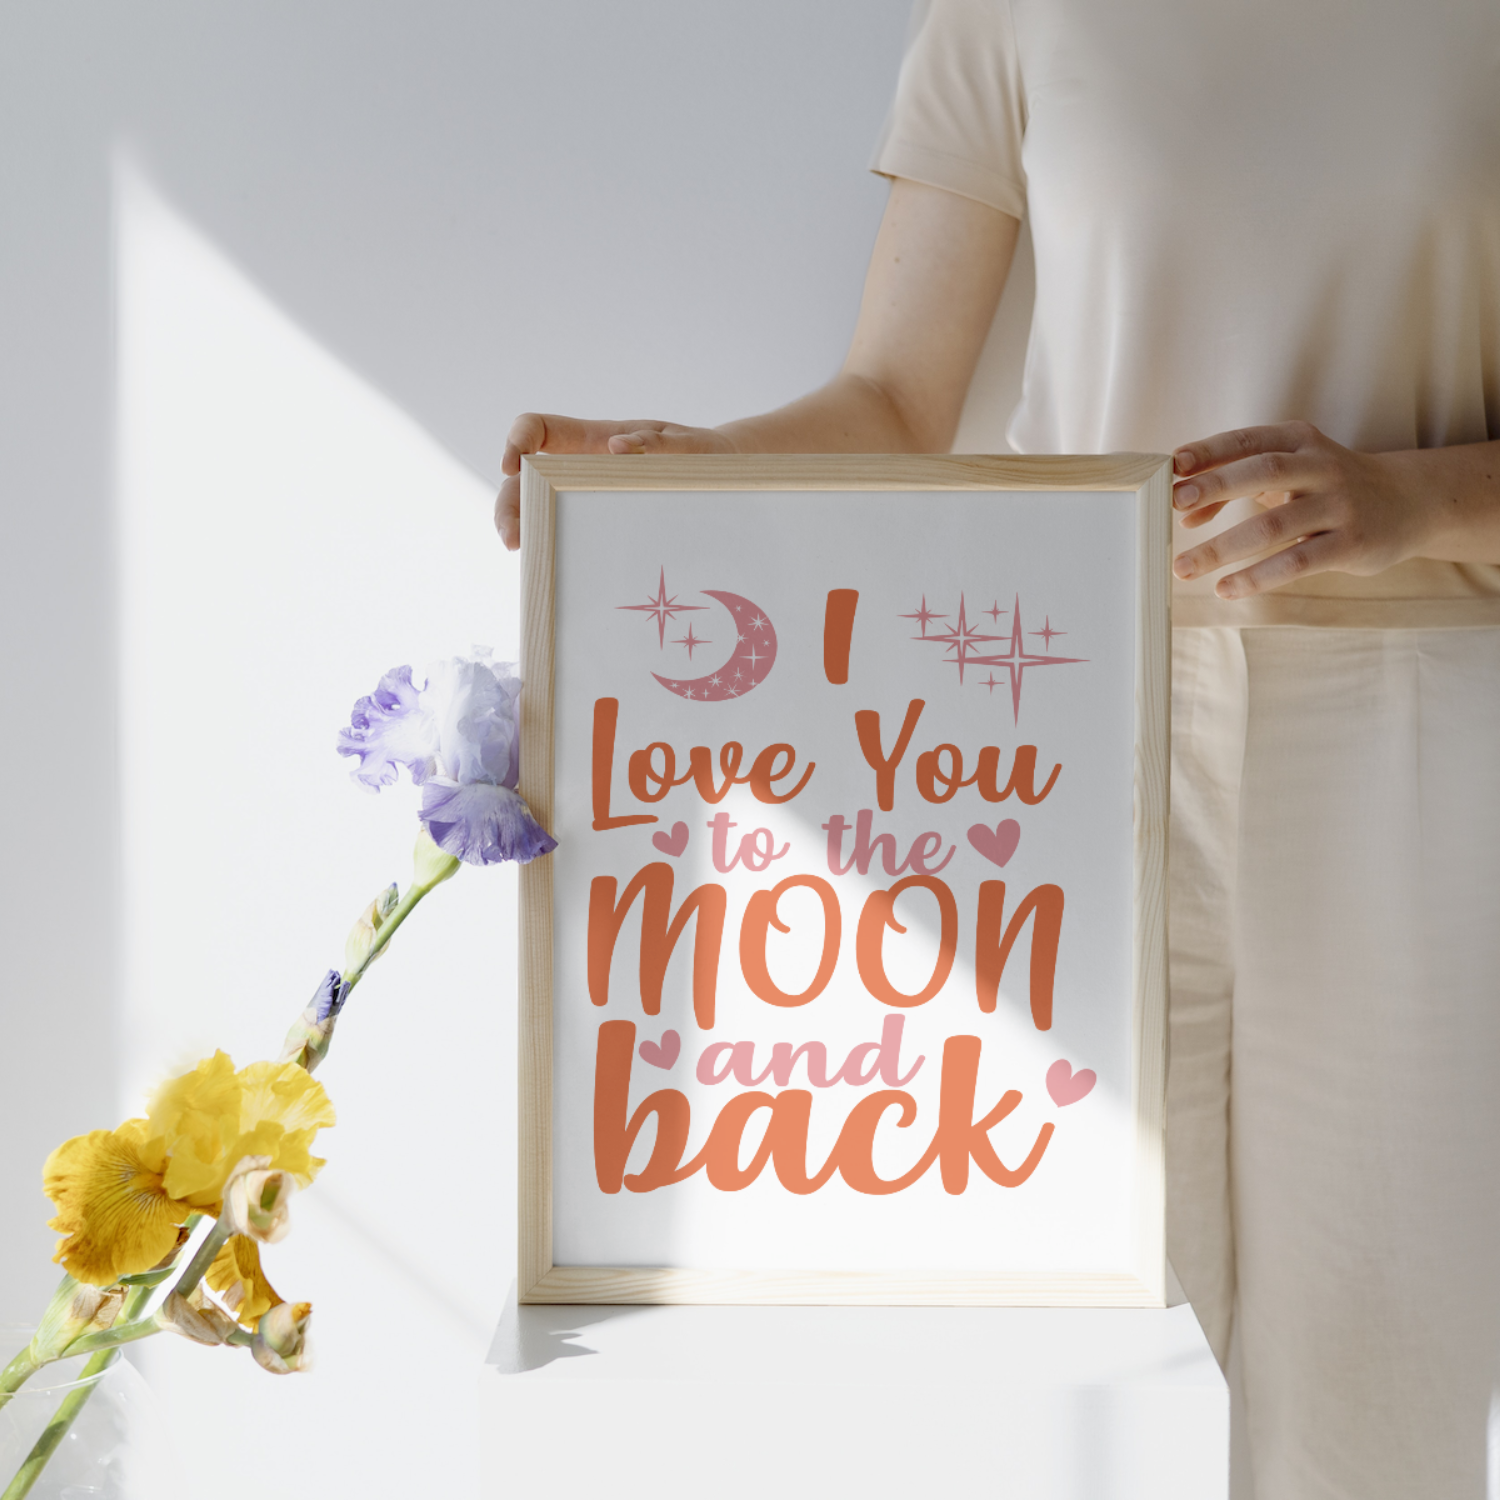 I love you to the moon and back SVG | Digital Download | Cut File | SVG - Only The Sweet Stuff